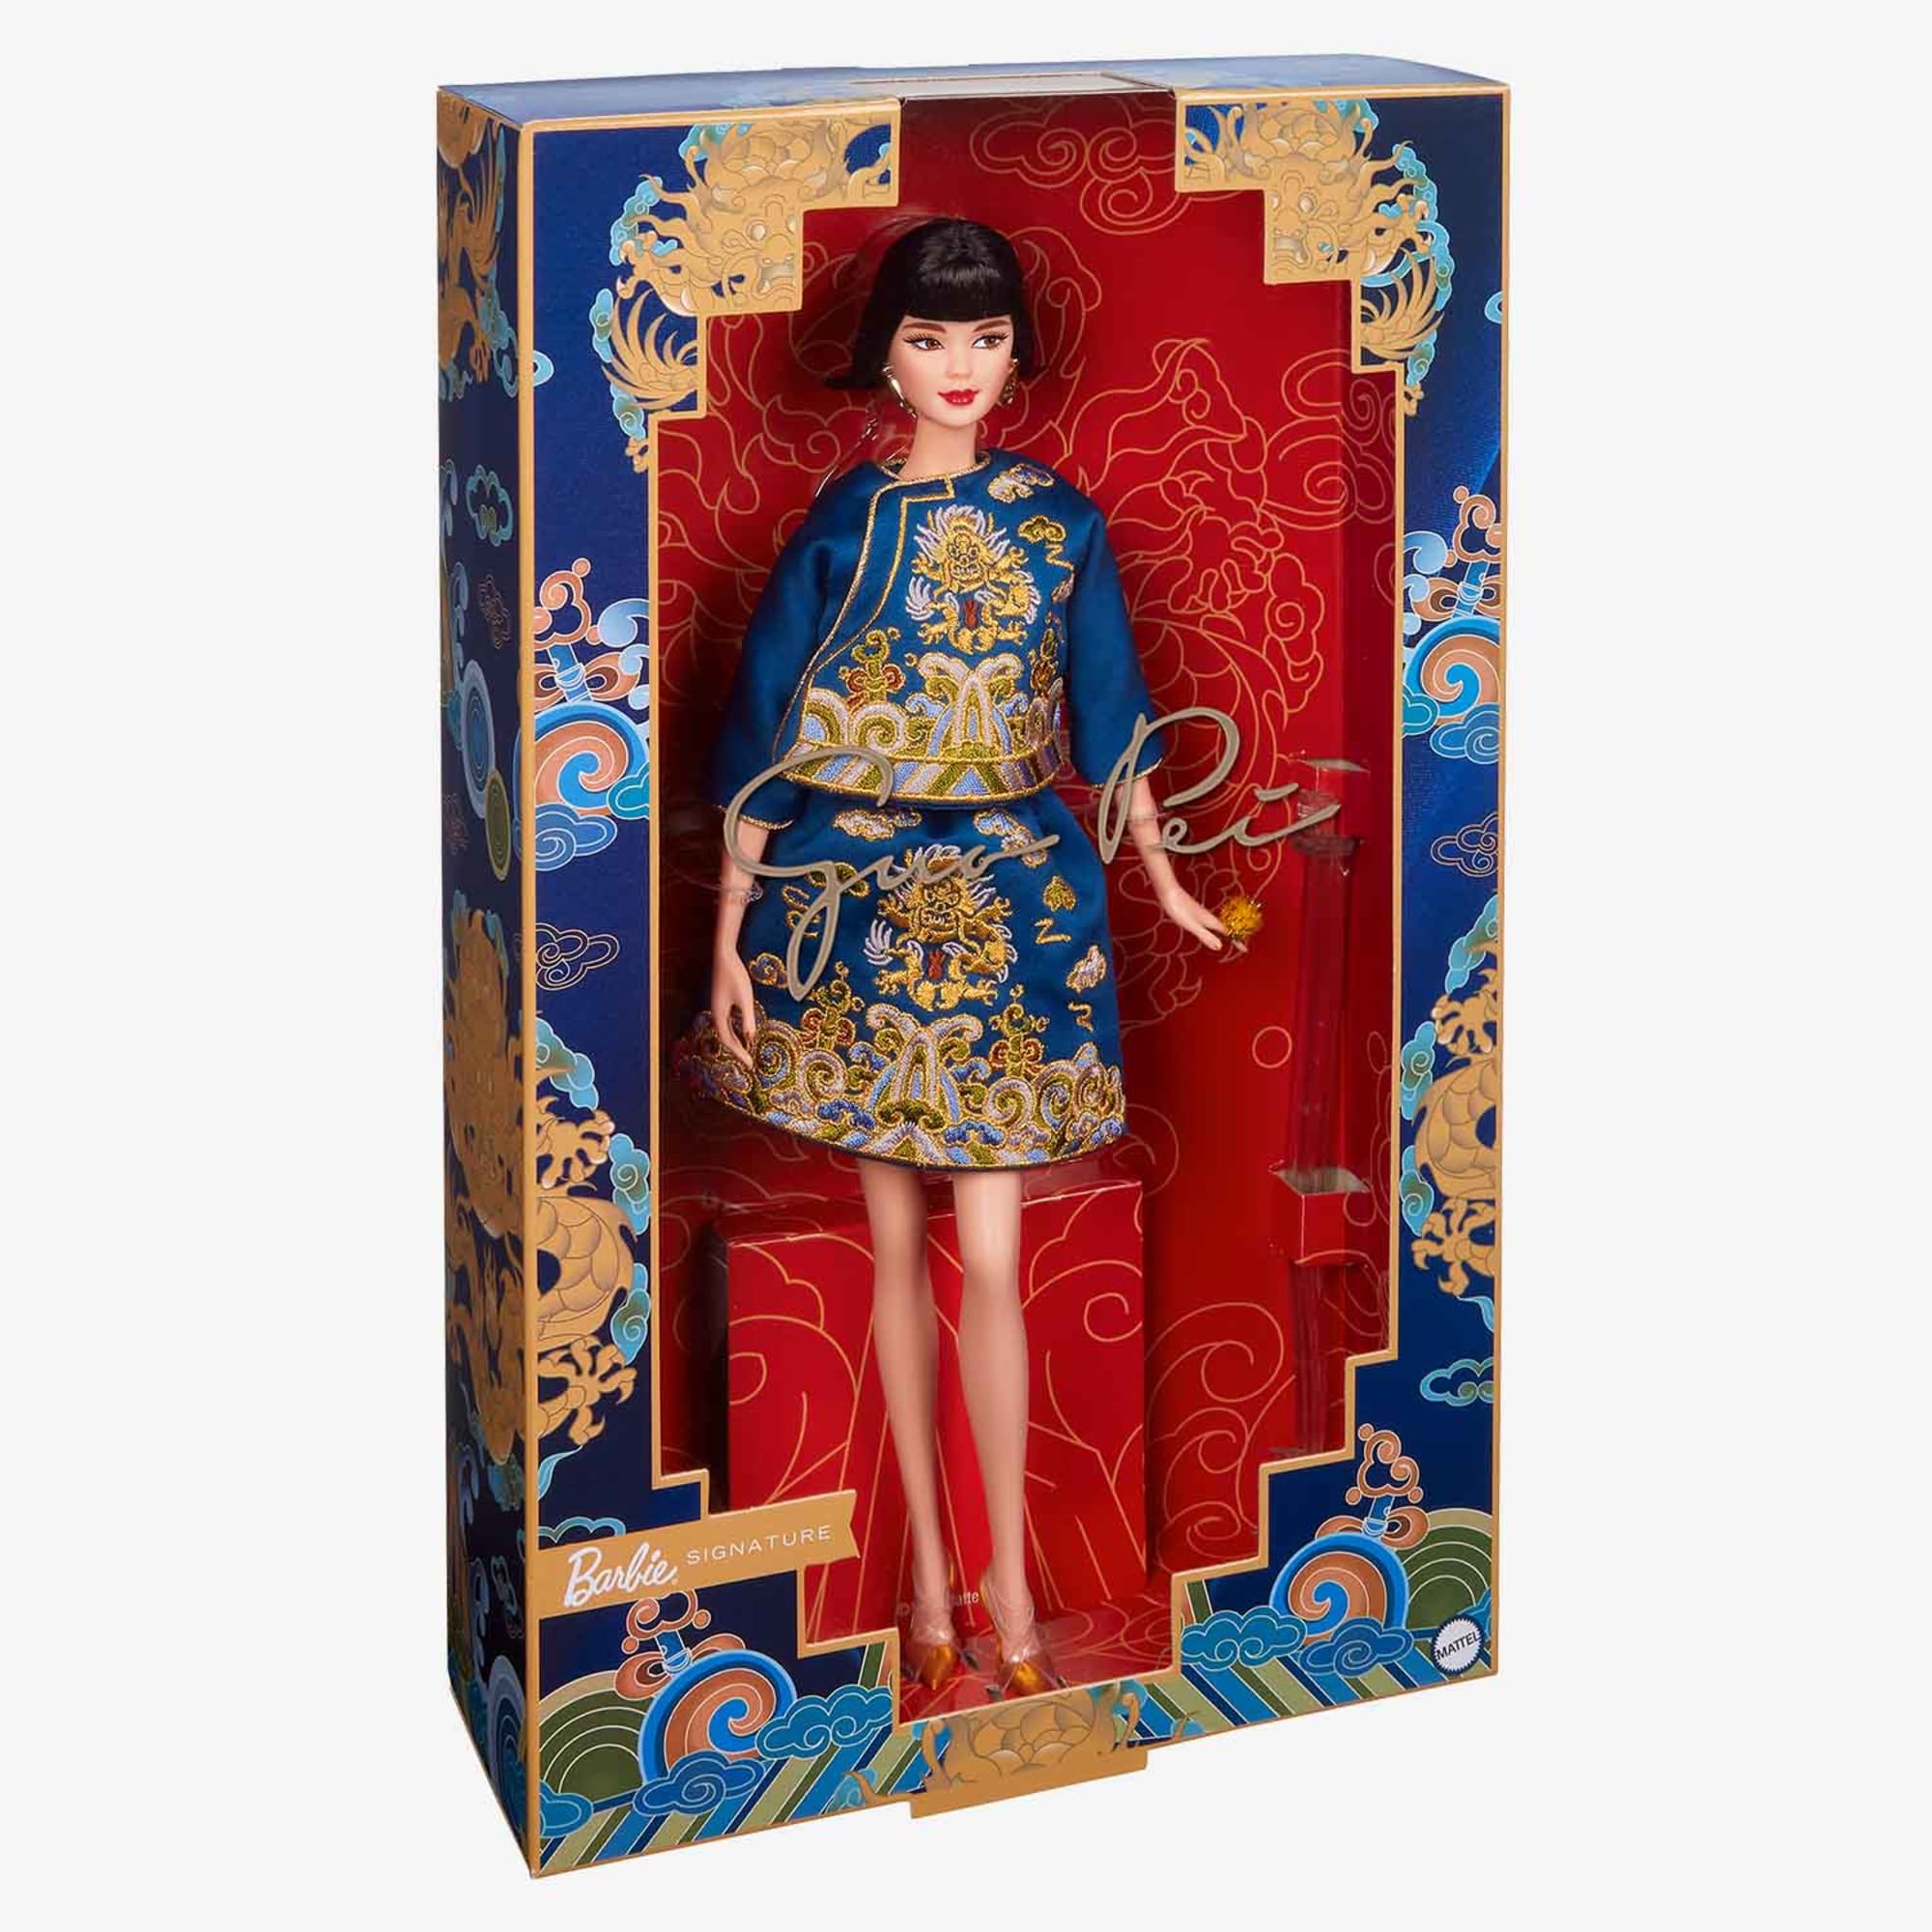 2023 Barbie Lunar New Year Doll Designed by Guo Pei – Mattel Creations